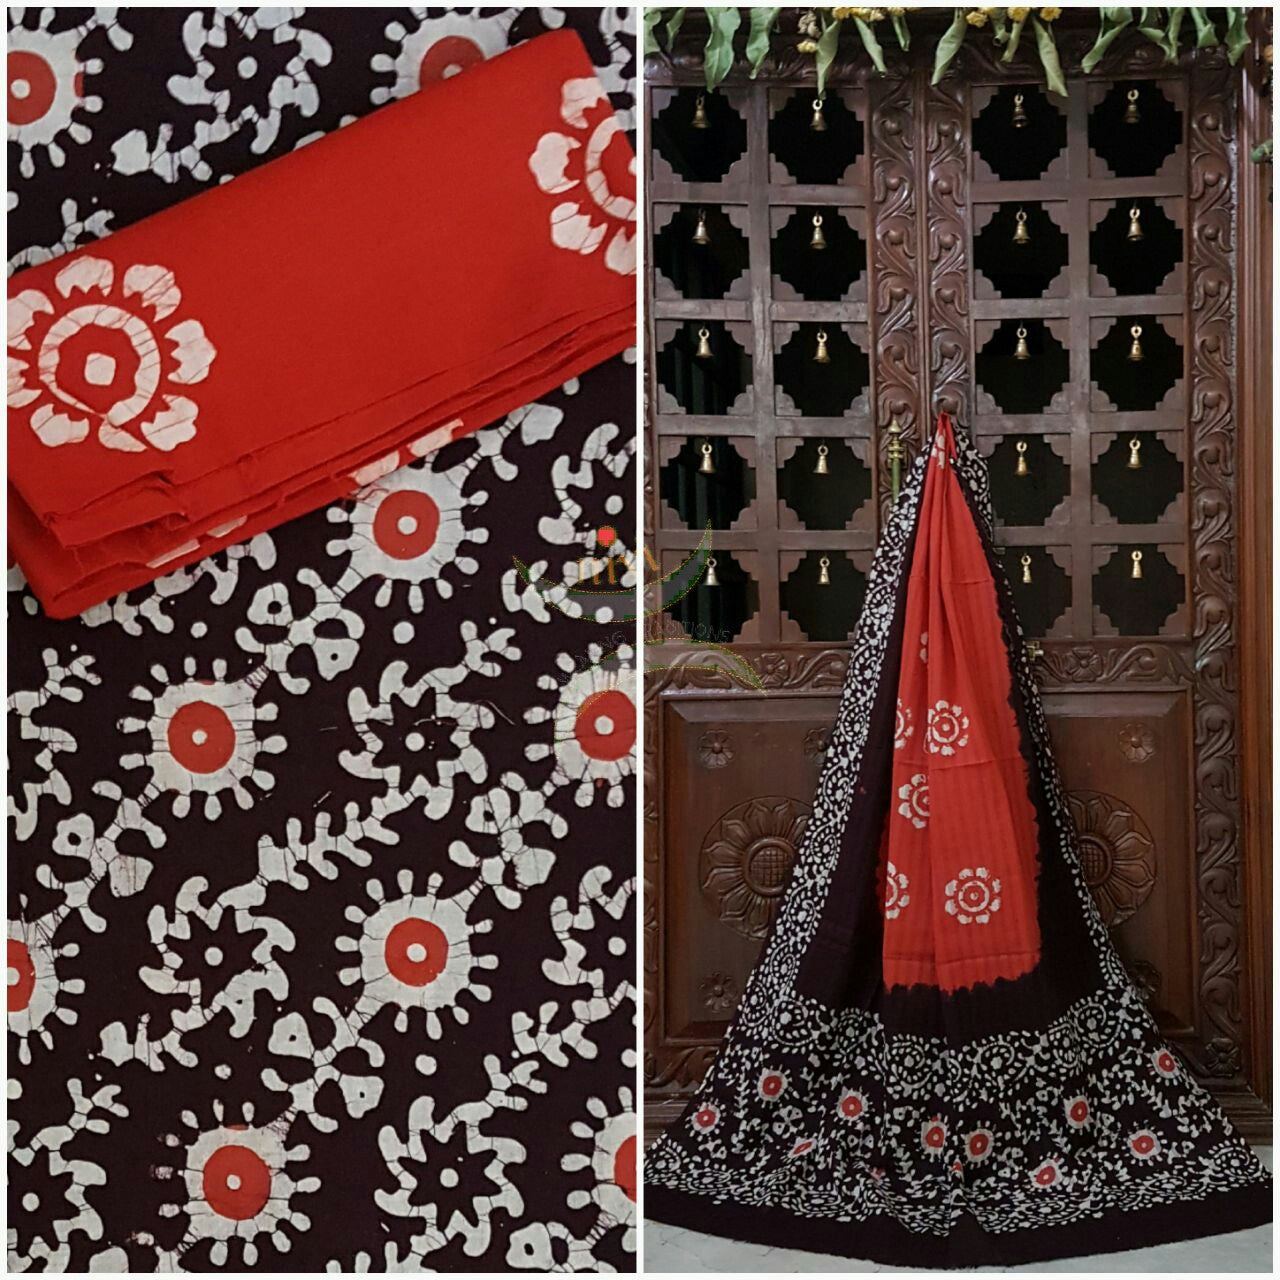 Black with Red Handloom Mul Cotton Batik printed dress material with floral motif.